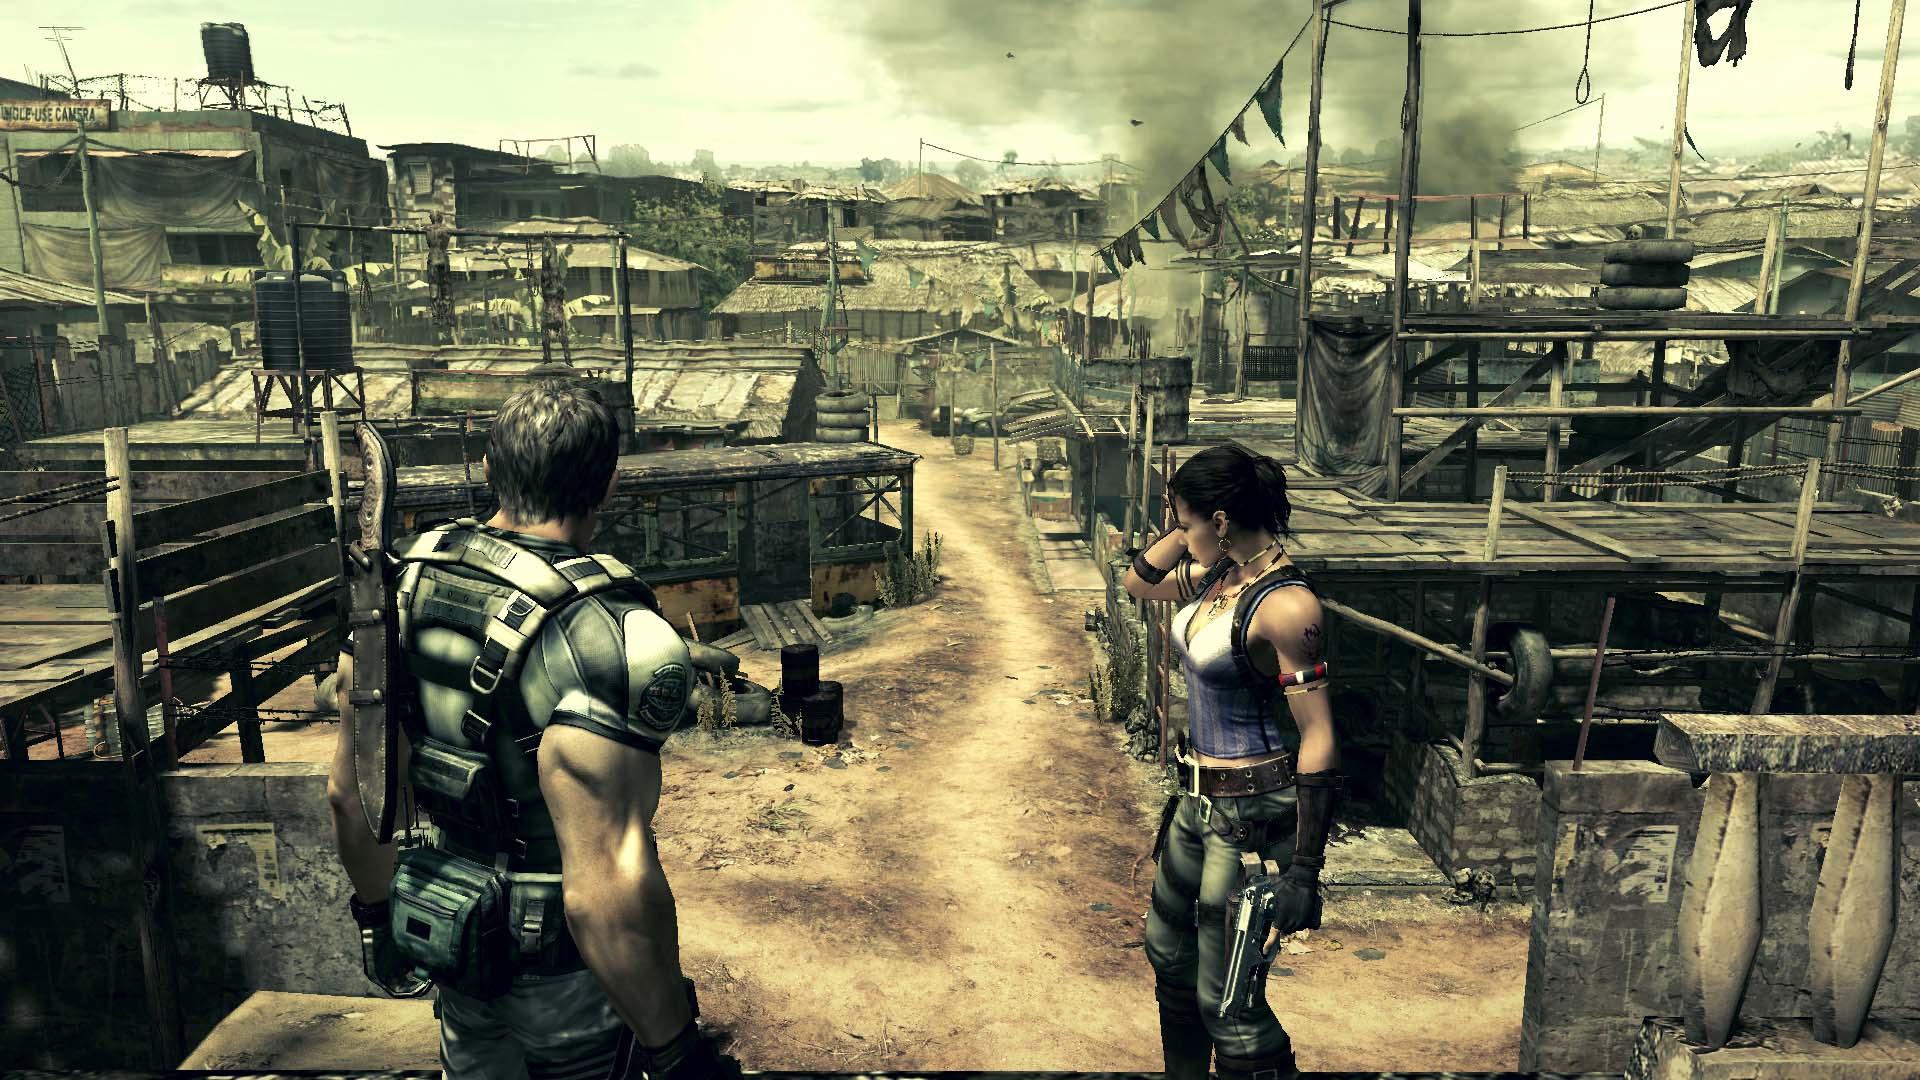 Is Resident Evil 5 Getting A Remake? - Insider Gaming